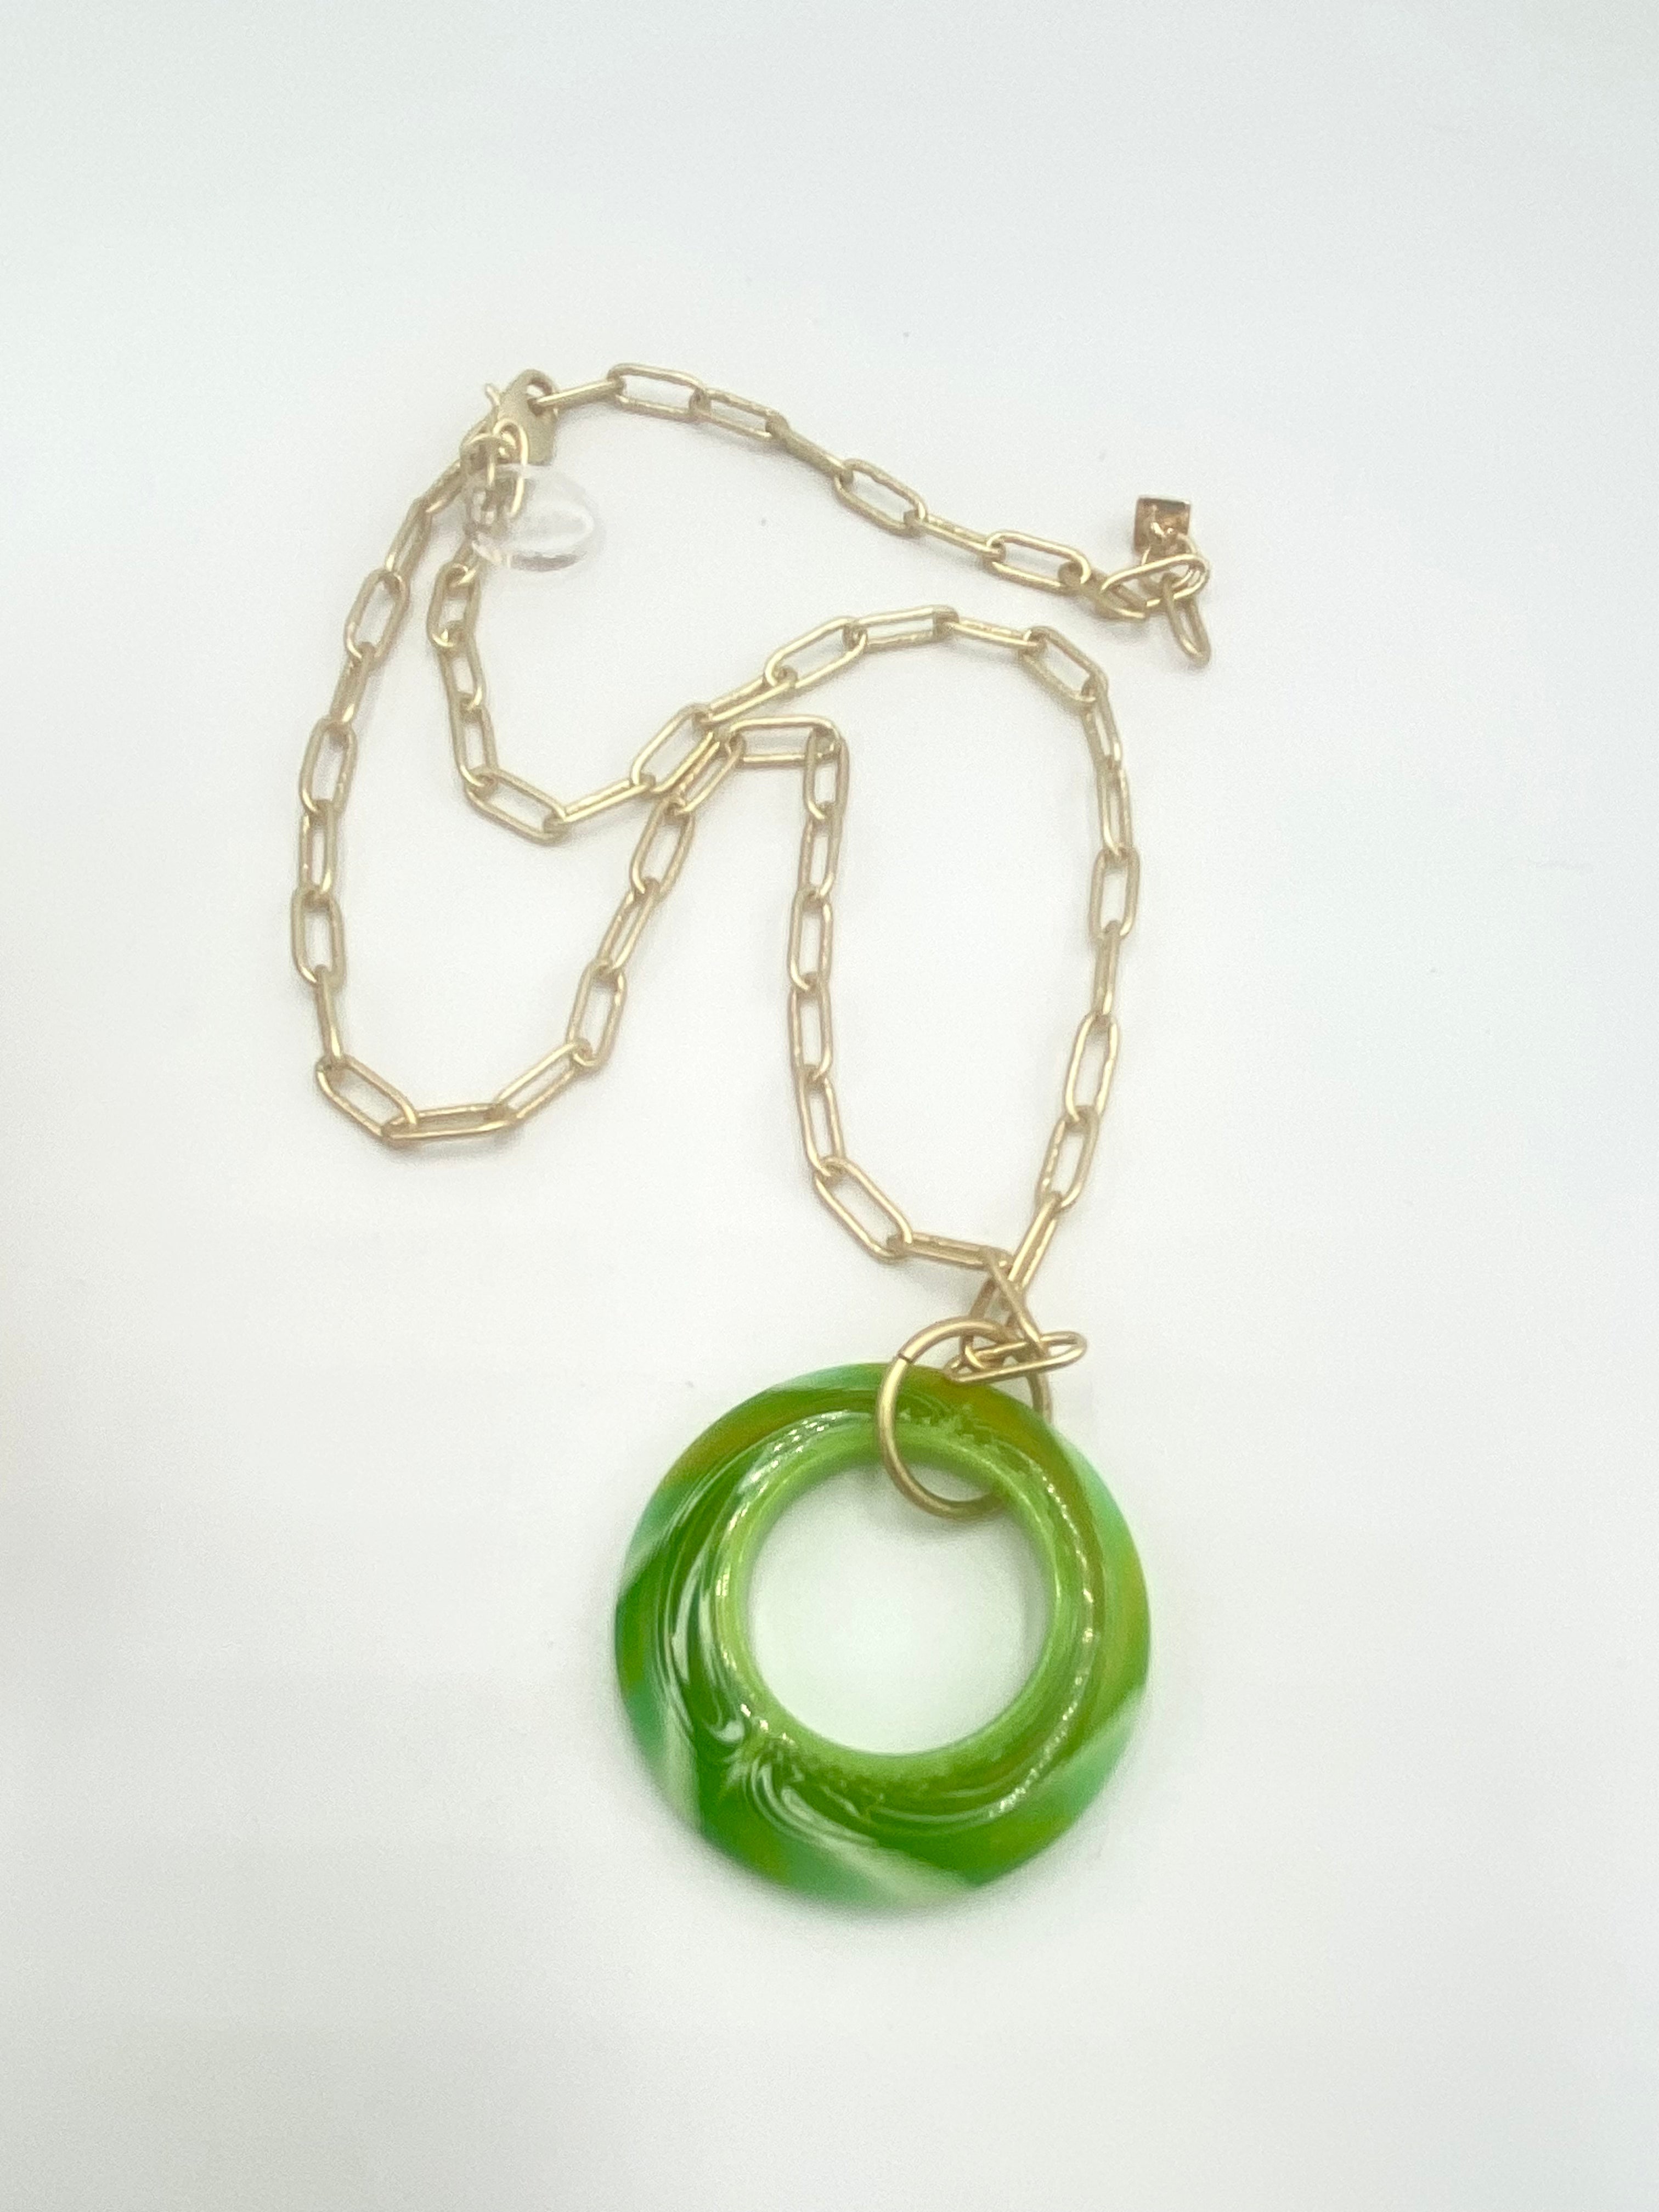 Green Swirl Candy Necklace - Shortie